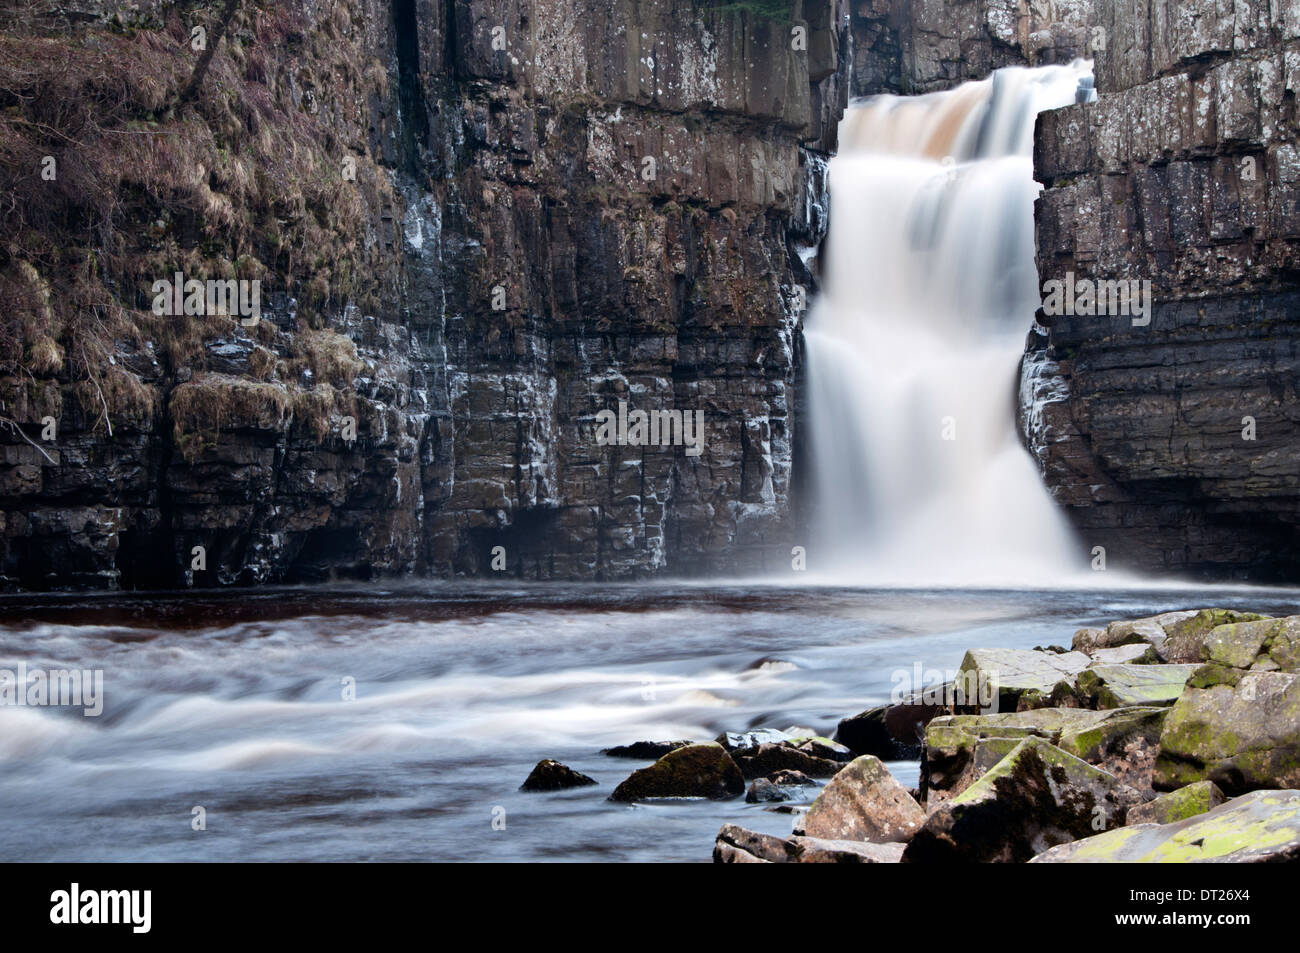 Forza elevata in cascata sul Fiume Tees, vicino a Middleton in Teesdale, Teesdale, County Durham, England, Regno Unito Foto Stock